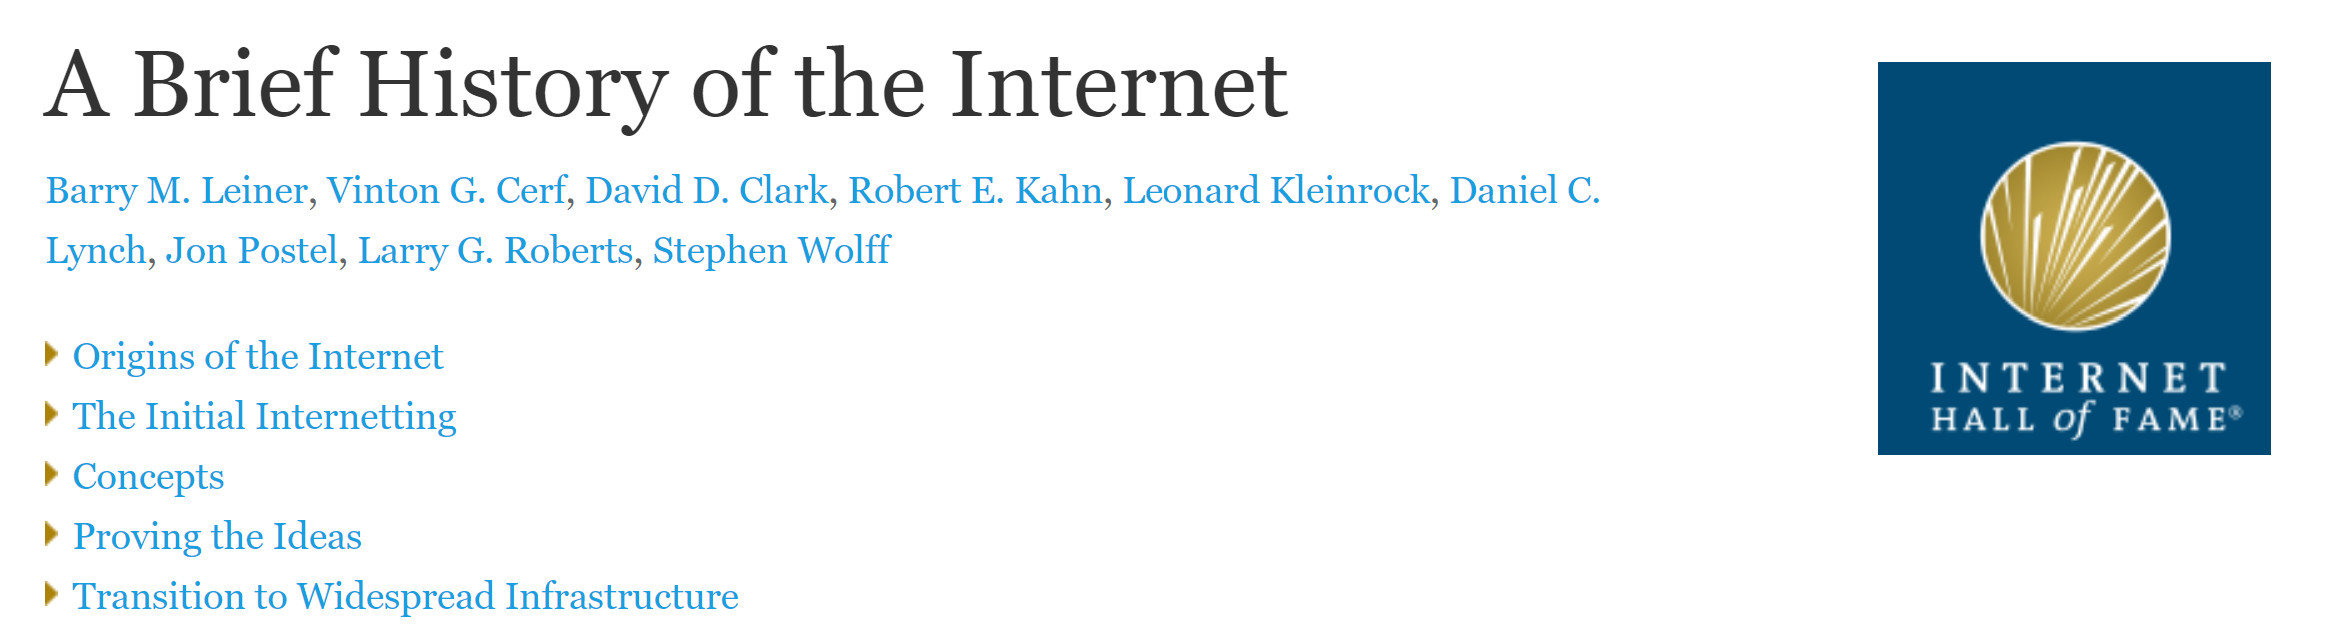 ihof-brief-history-of-the-internet